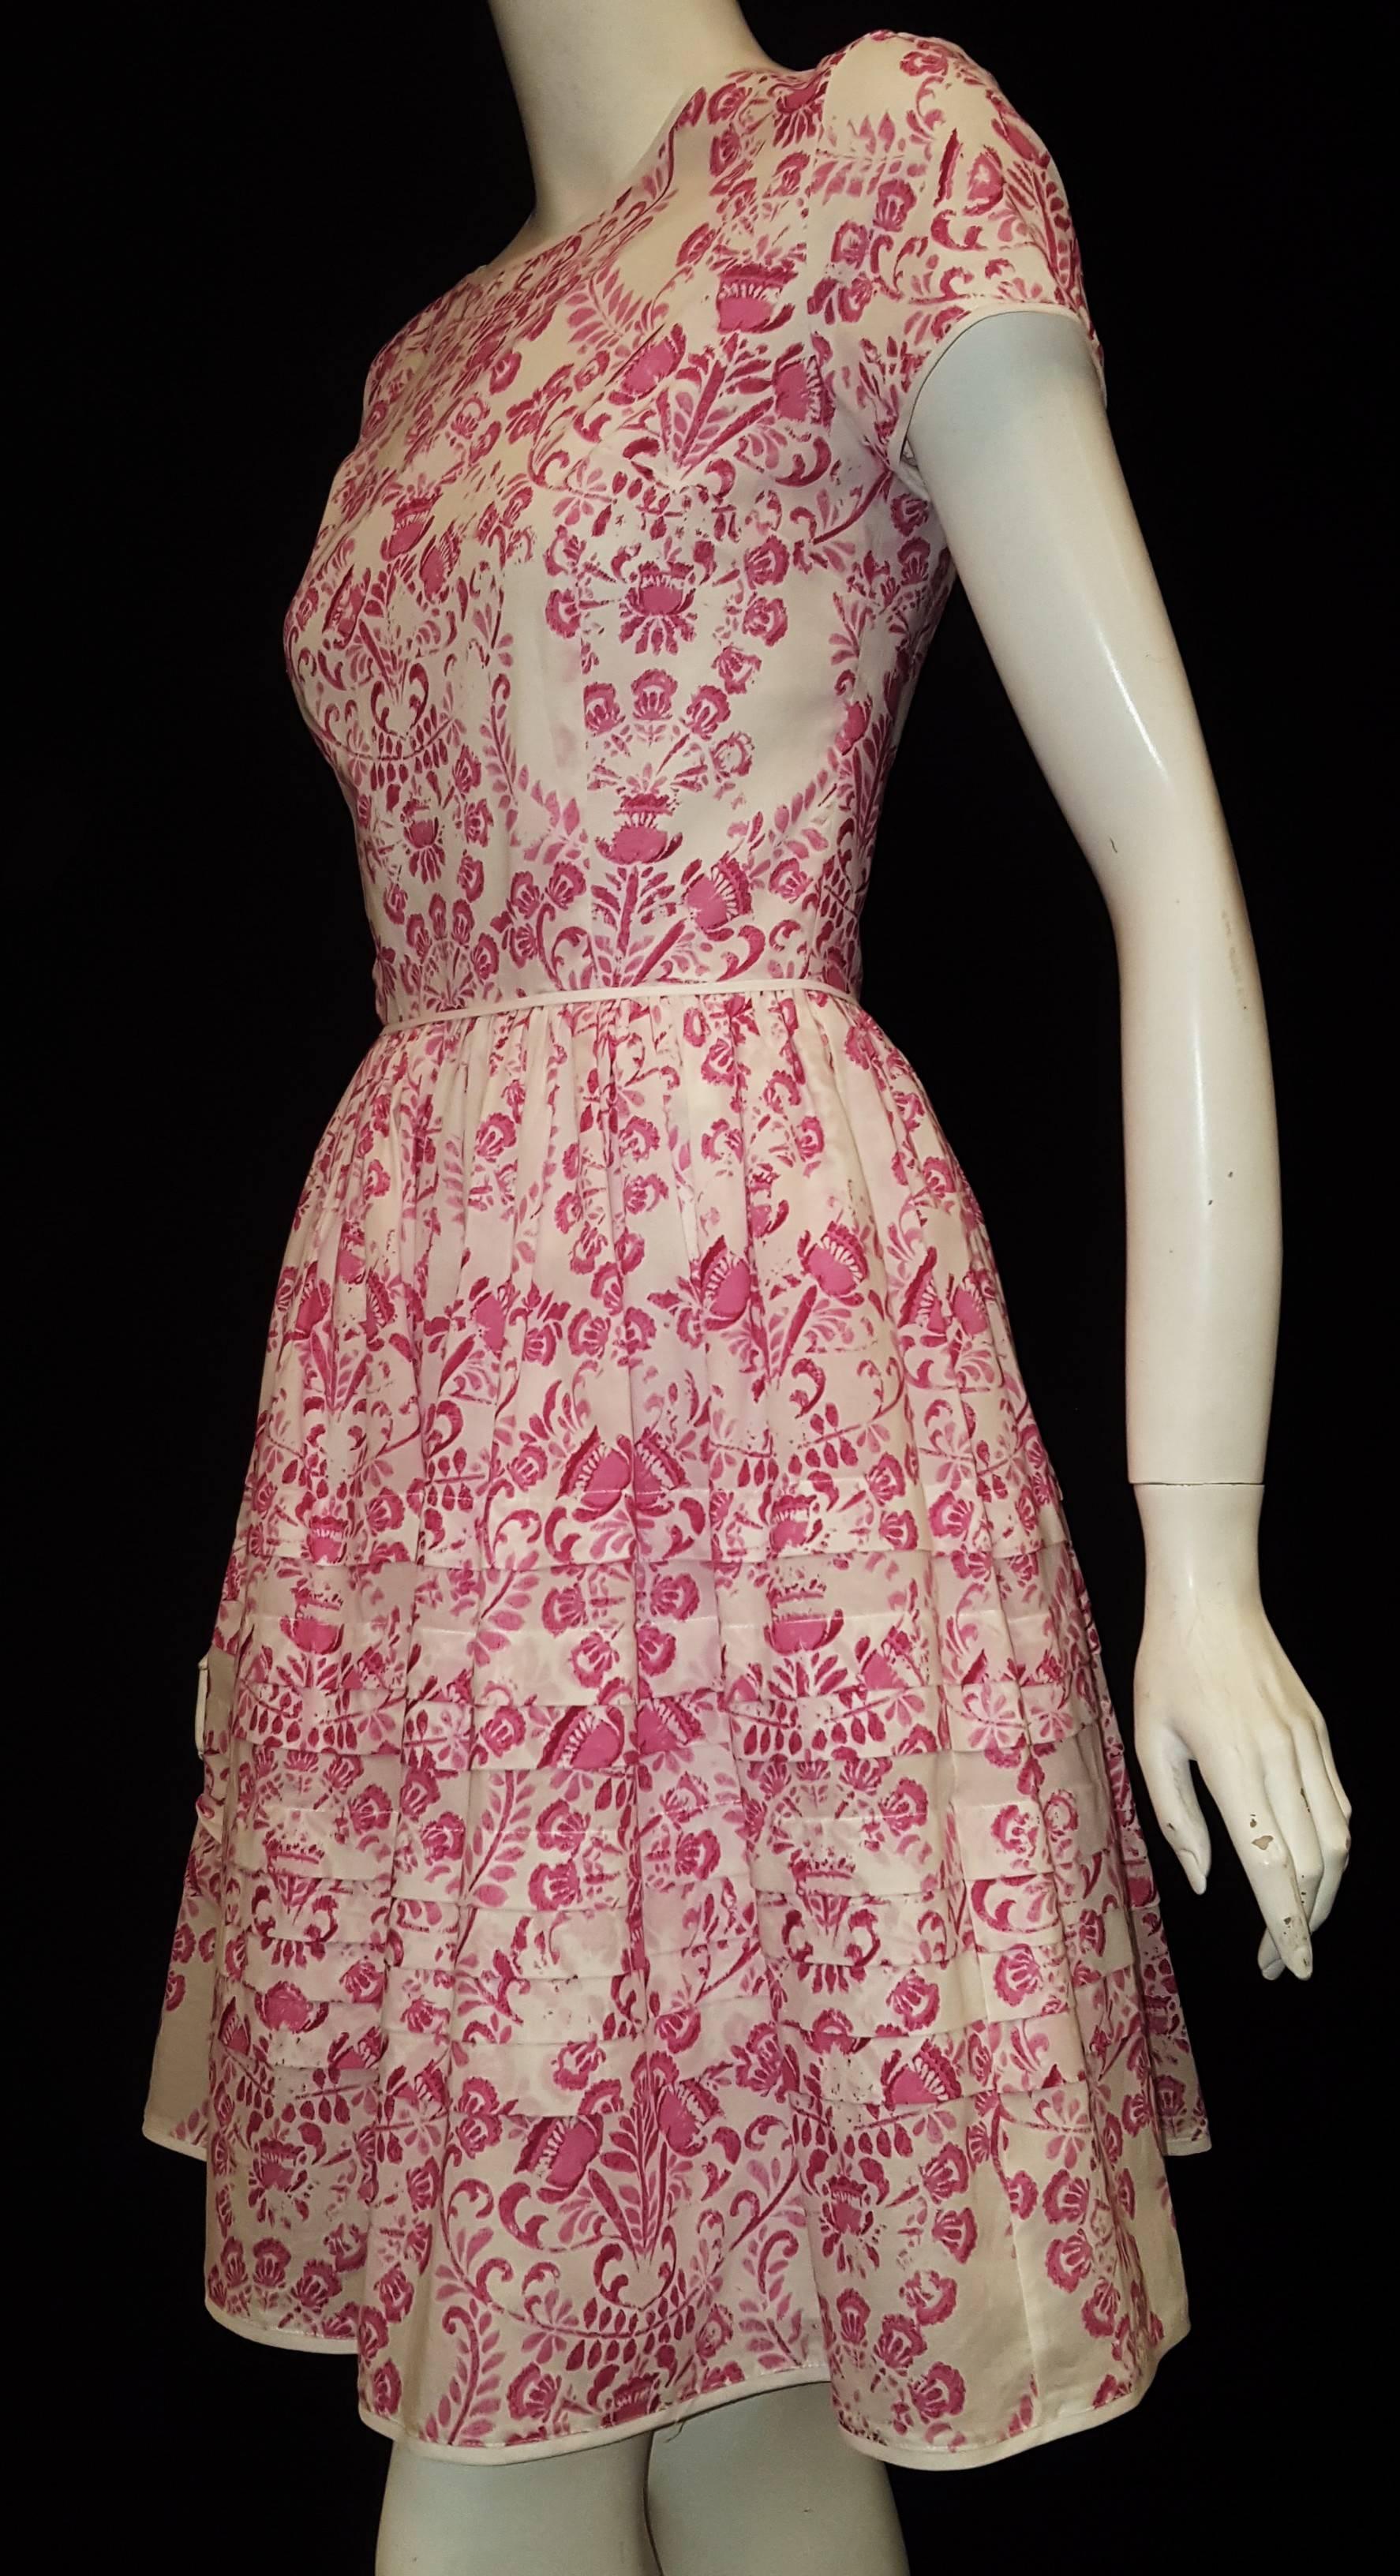 Oscar de la Renta cotton pink and white floral tile print dress with white trim around neckline, short sleeves, waist and hem is fresh and light for this upcoming summer season.   This Made in Portugal dress goes back to the Portuguese decorative